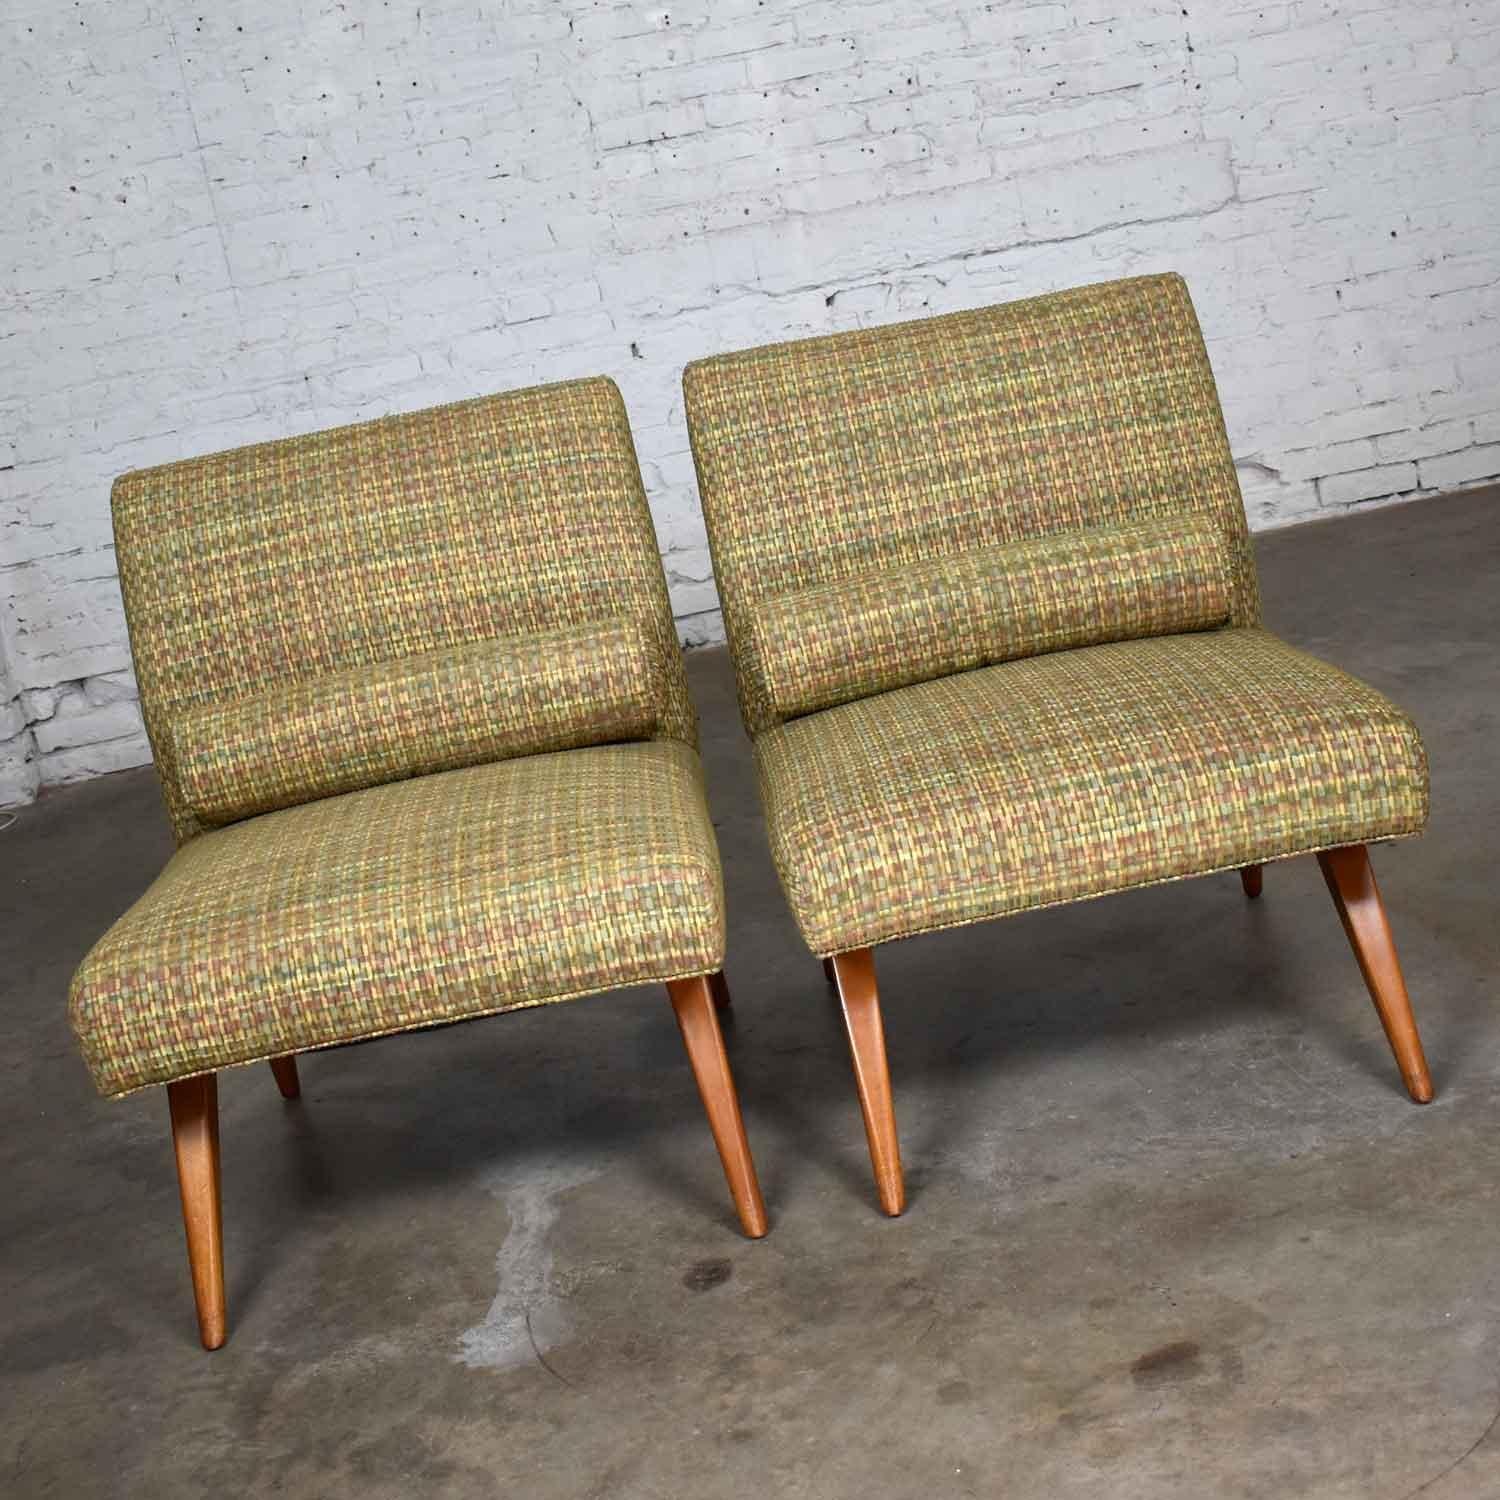 Gorgeous pair of mid-century modern Model 100 Planner Group slipper chairs by Paul McCobb for Custom Craft. They are upholstered in an overall chartreuse green tweed-like fabric with undertones of yellow and rosy red. They are in fabulous vintage